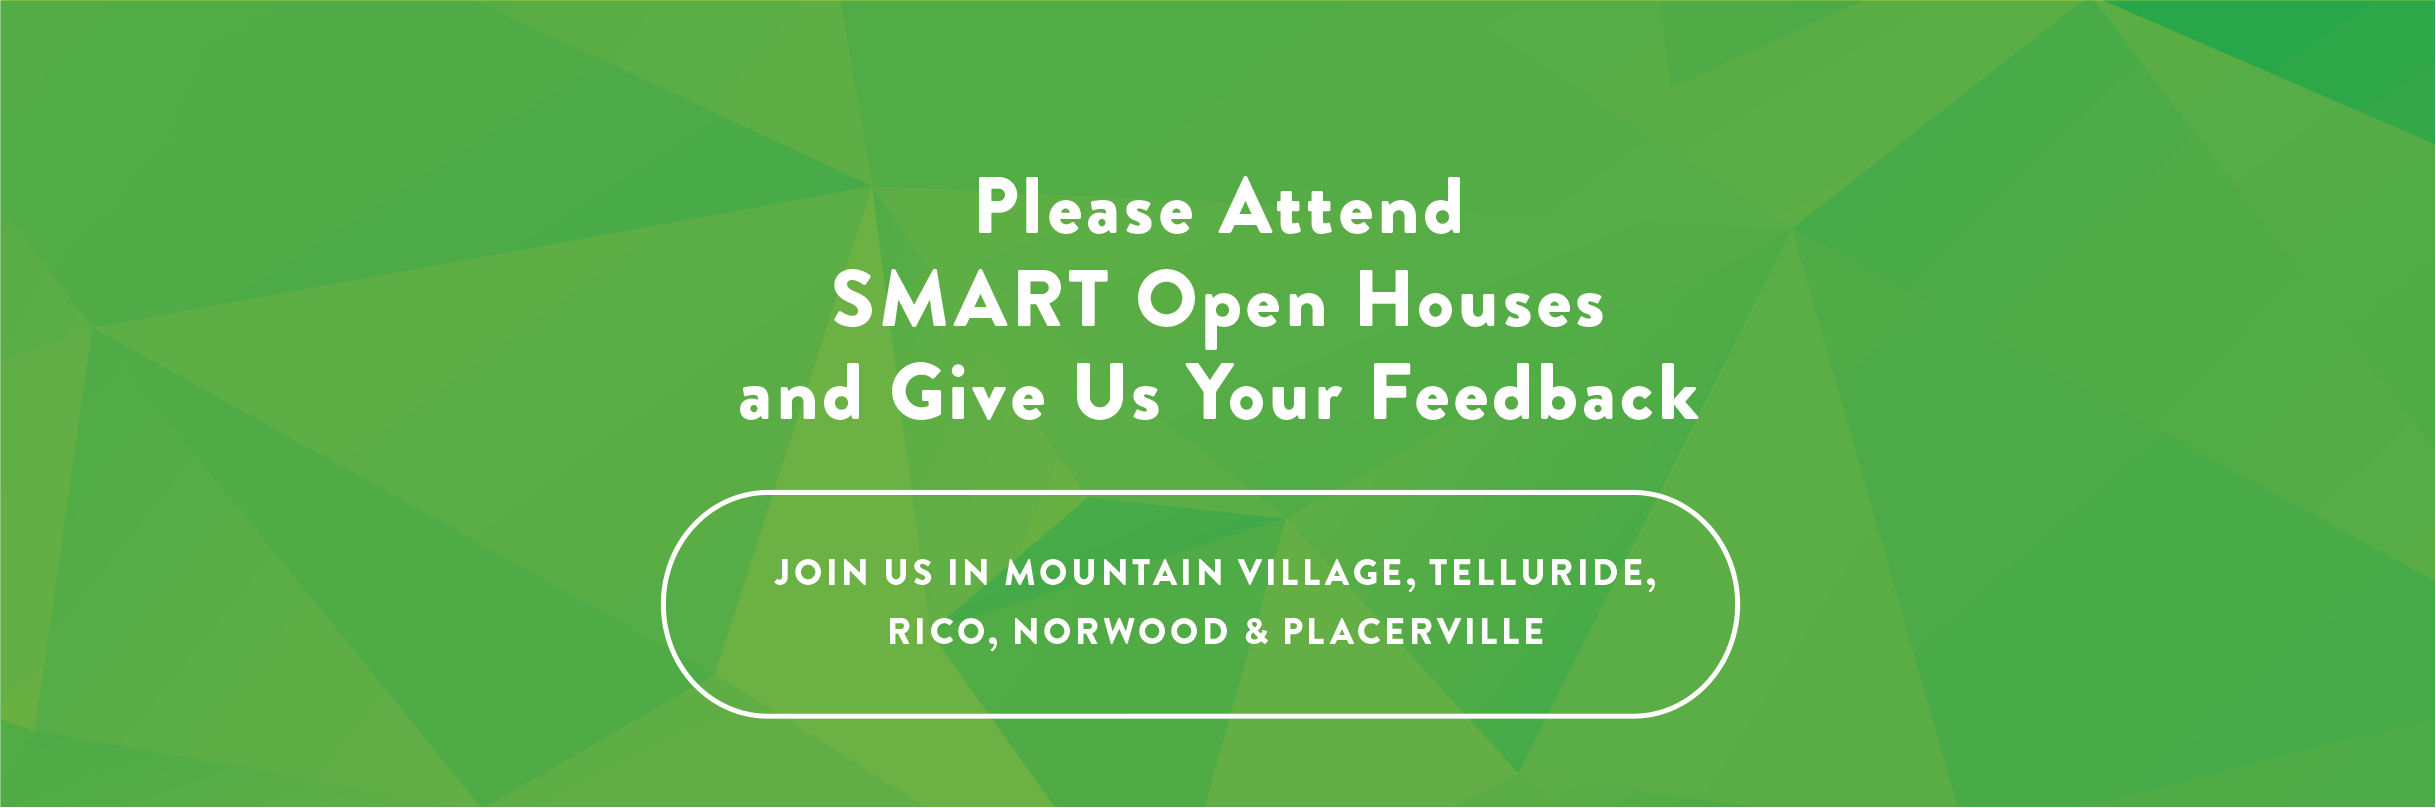 Please Attend SMART Open Houses and Give Us Your Feedback